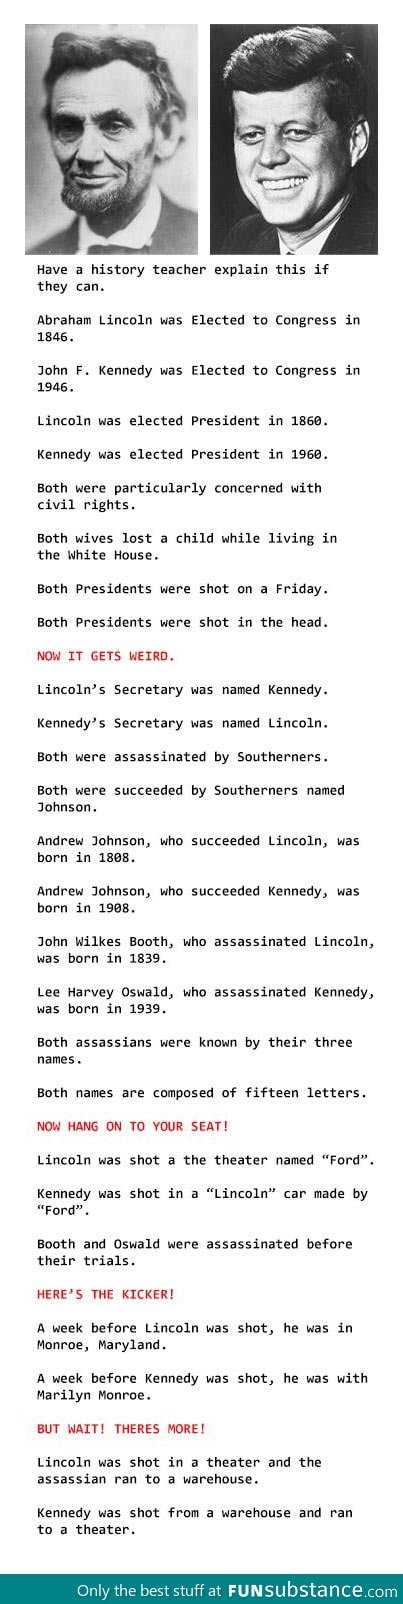 Mind blowing coincidences on Lincoln's and Kennedy's murder